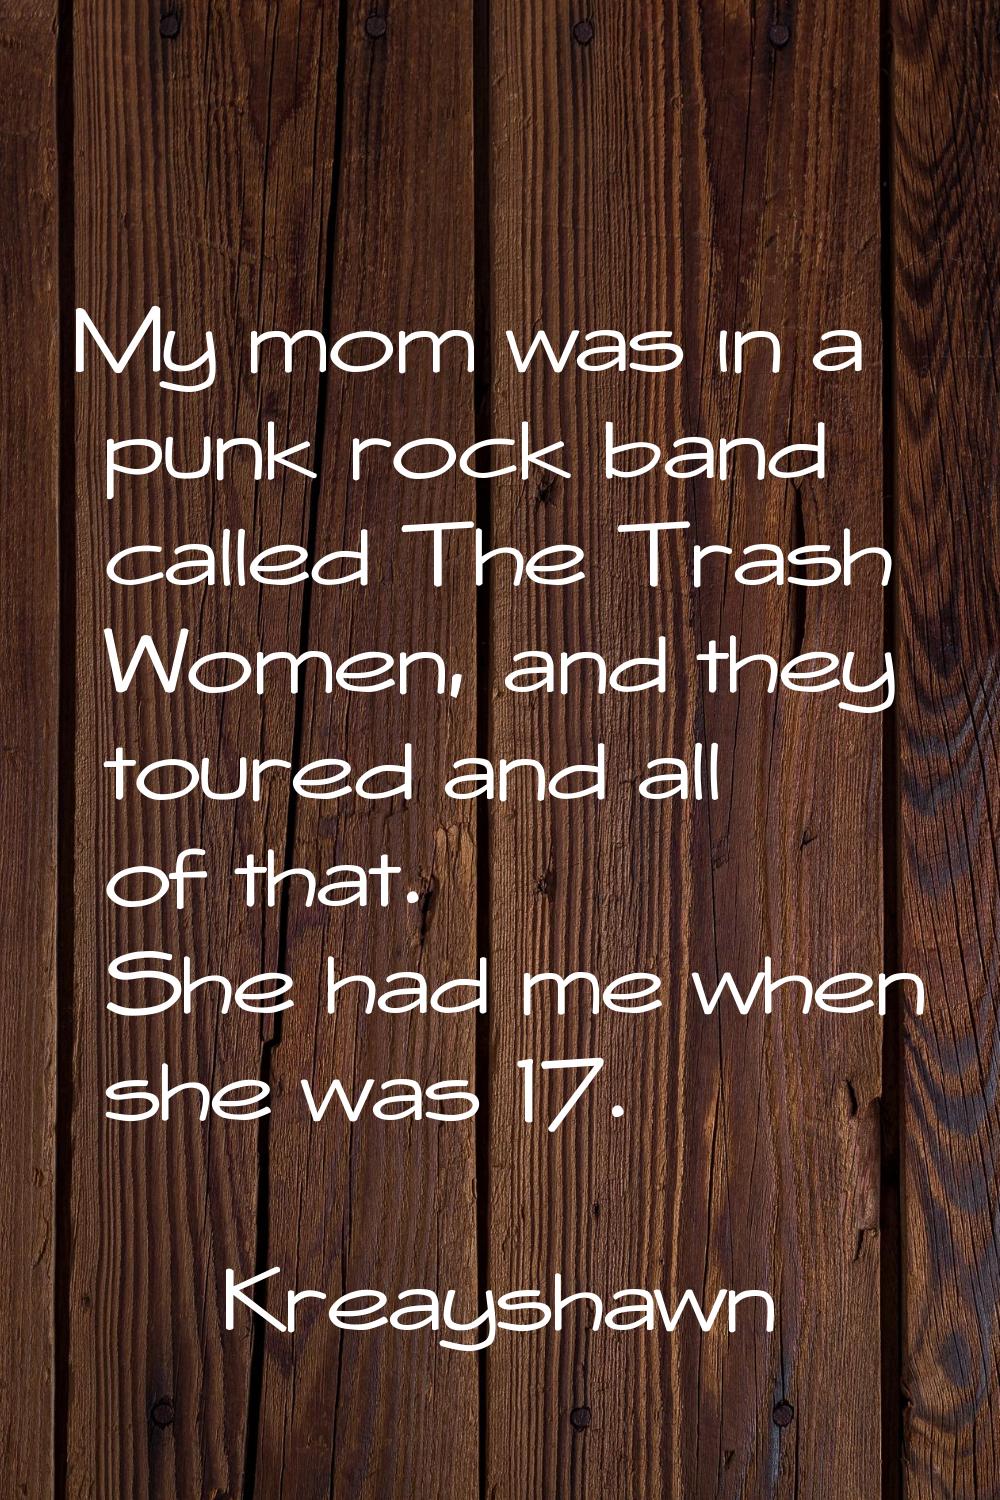 My mom was in a punk rock band called The Trash Women, and they toured and all of that. She had me 